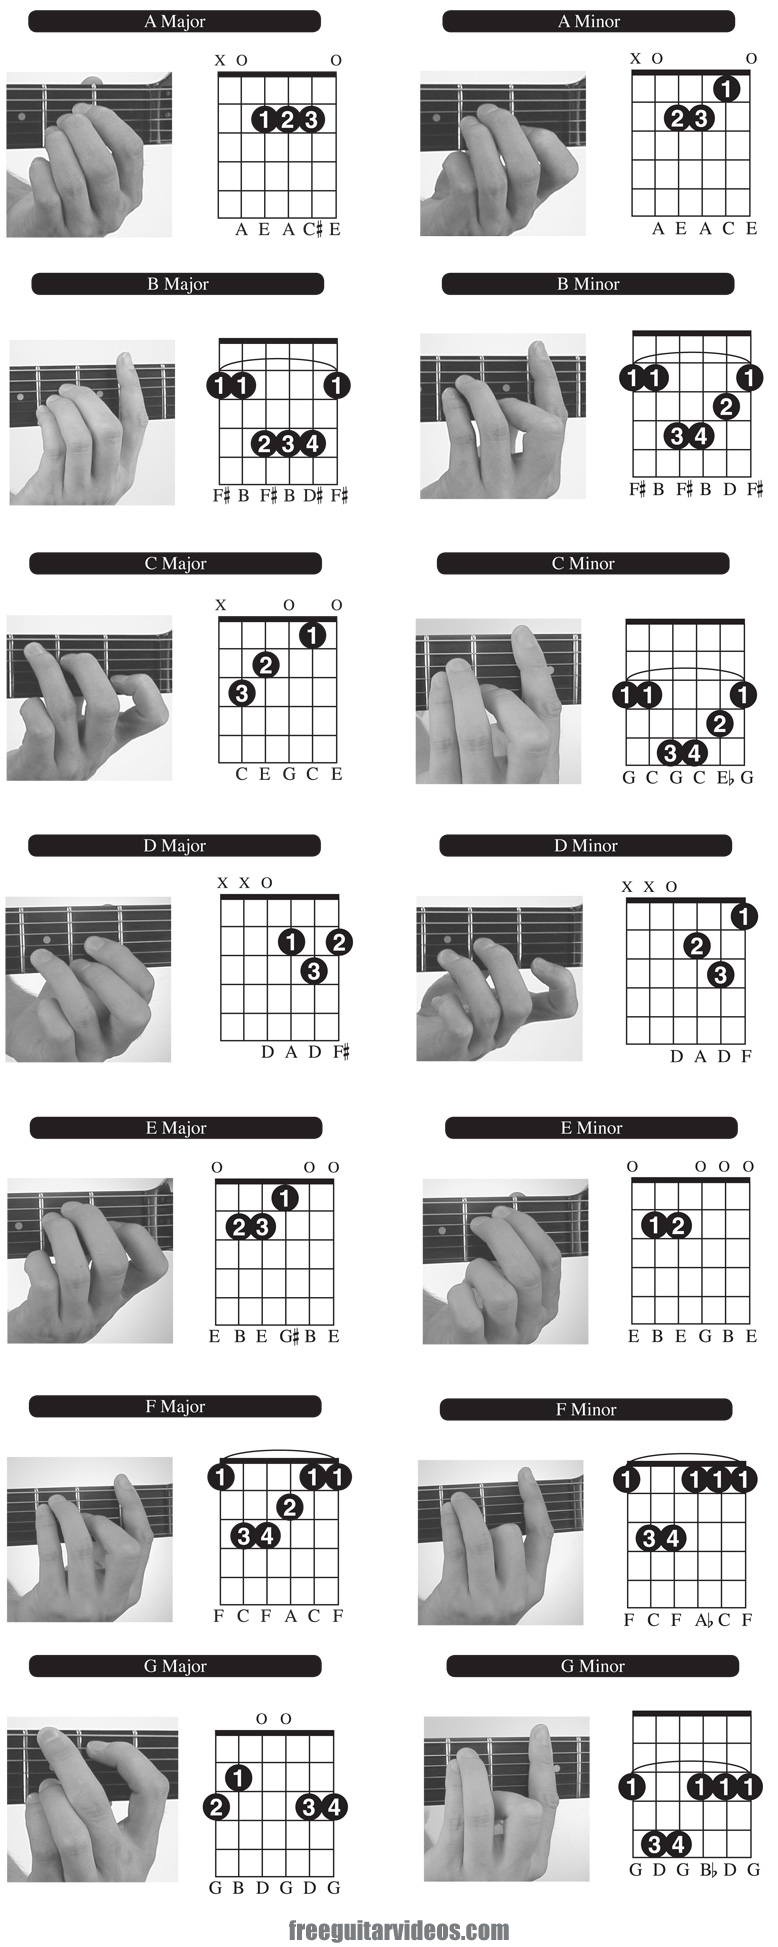 how to play basic guitar chords for beginners